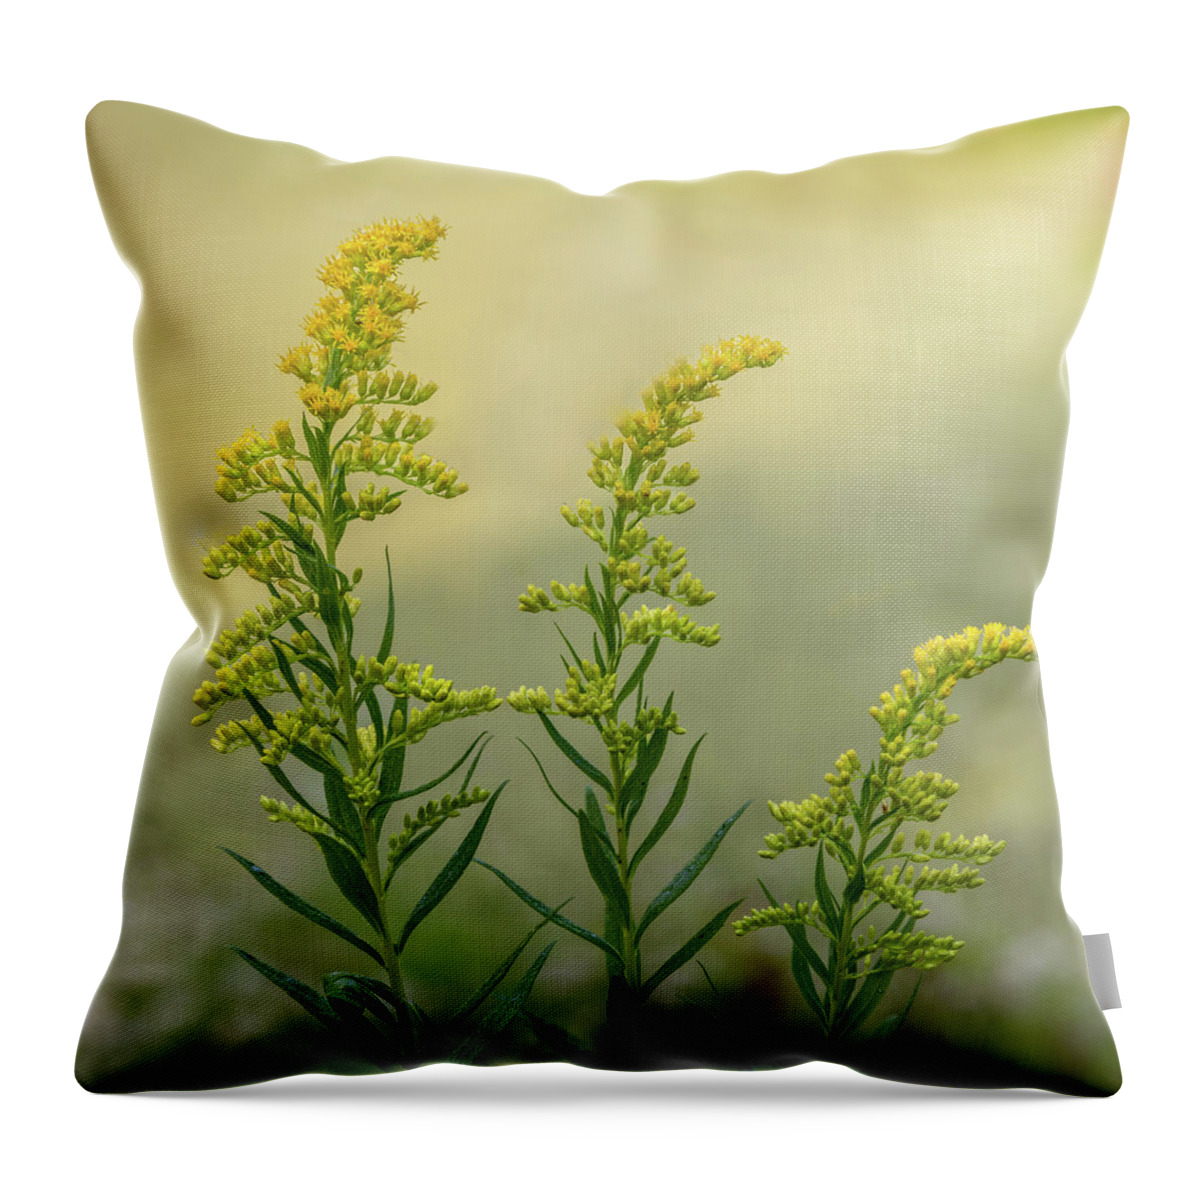 Arboretum Throw Pillow featuring the photograph Arboretum Wildflowers by James Woody